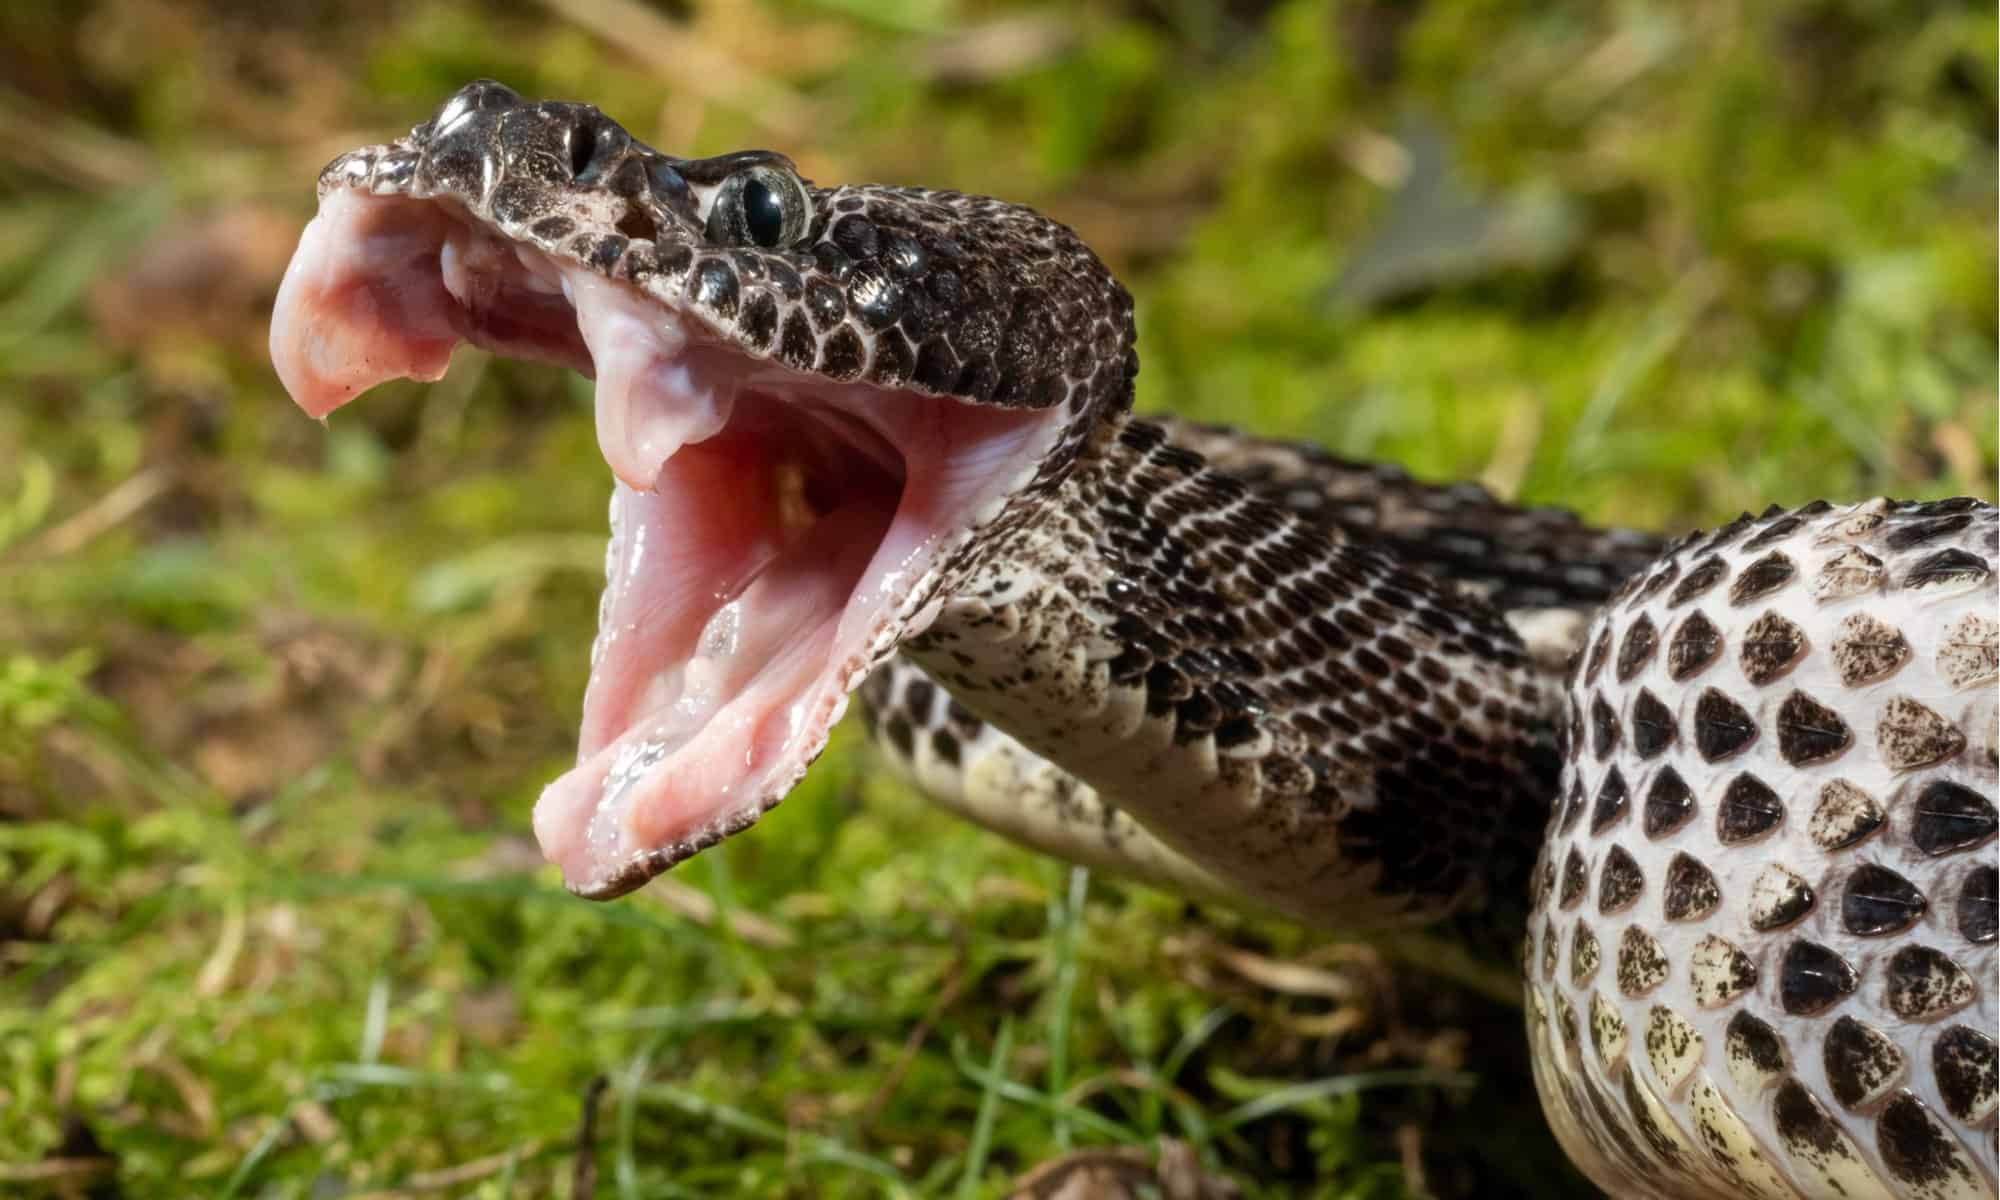 Can a Rattlesnake Kill You?